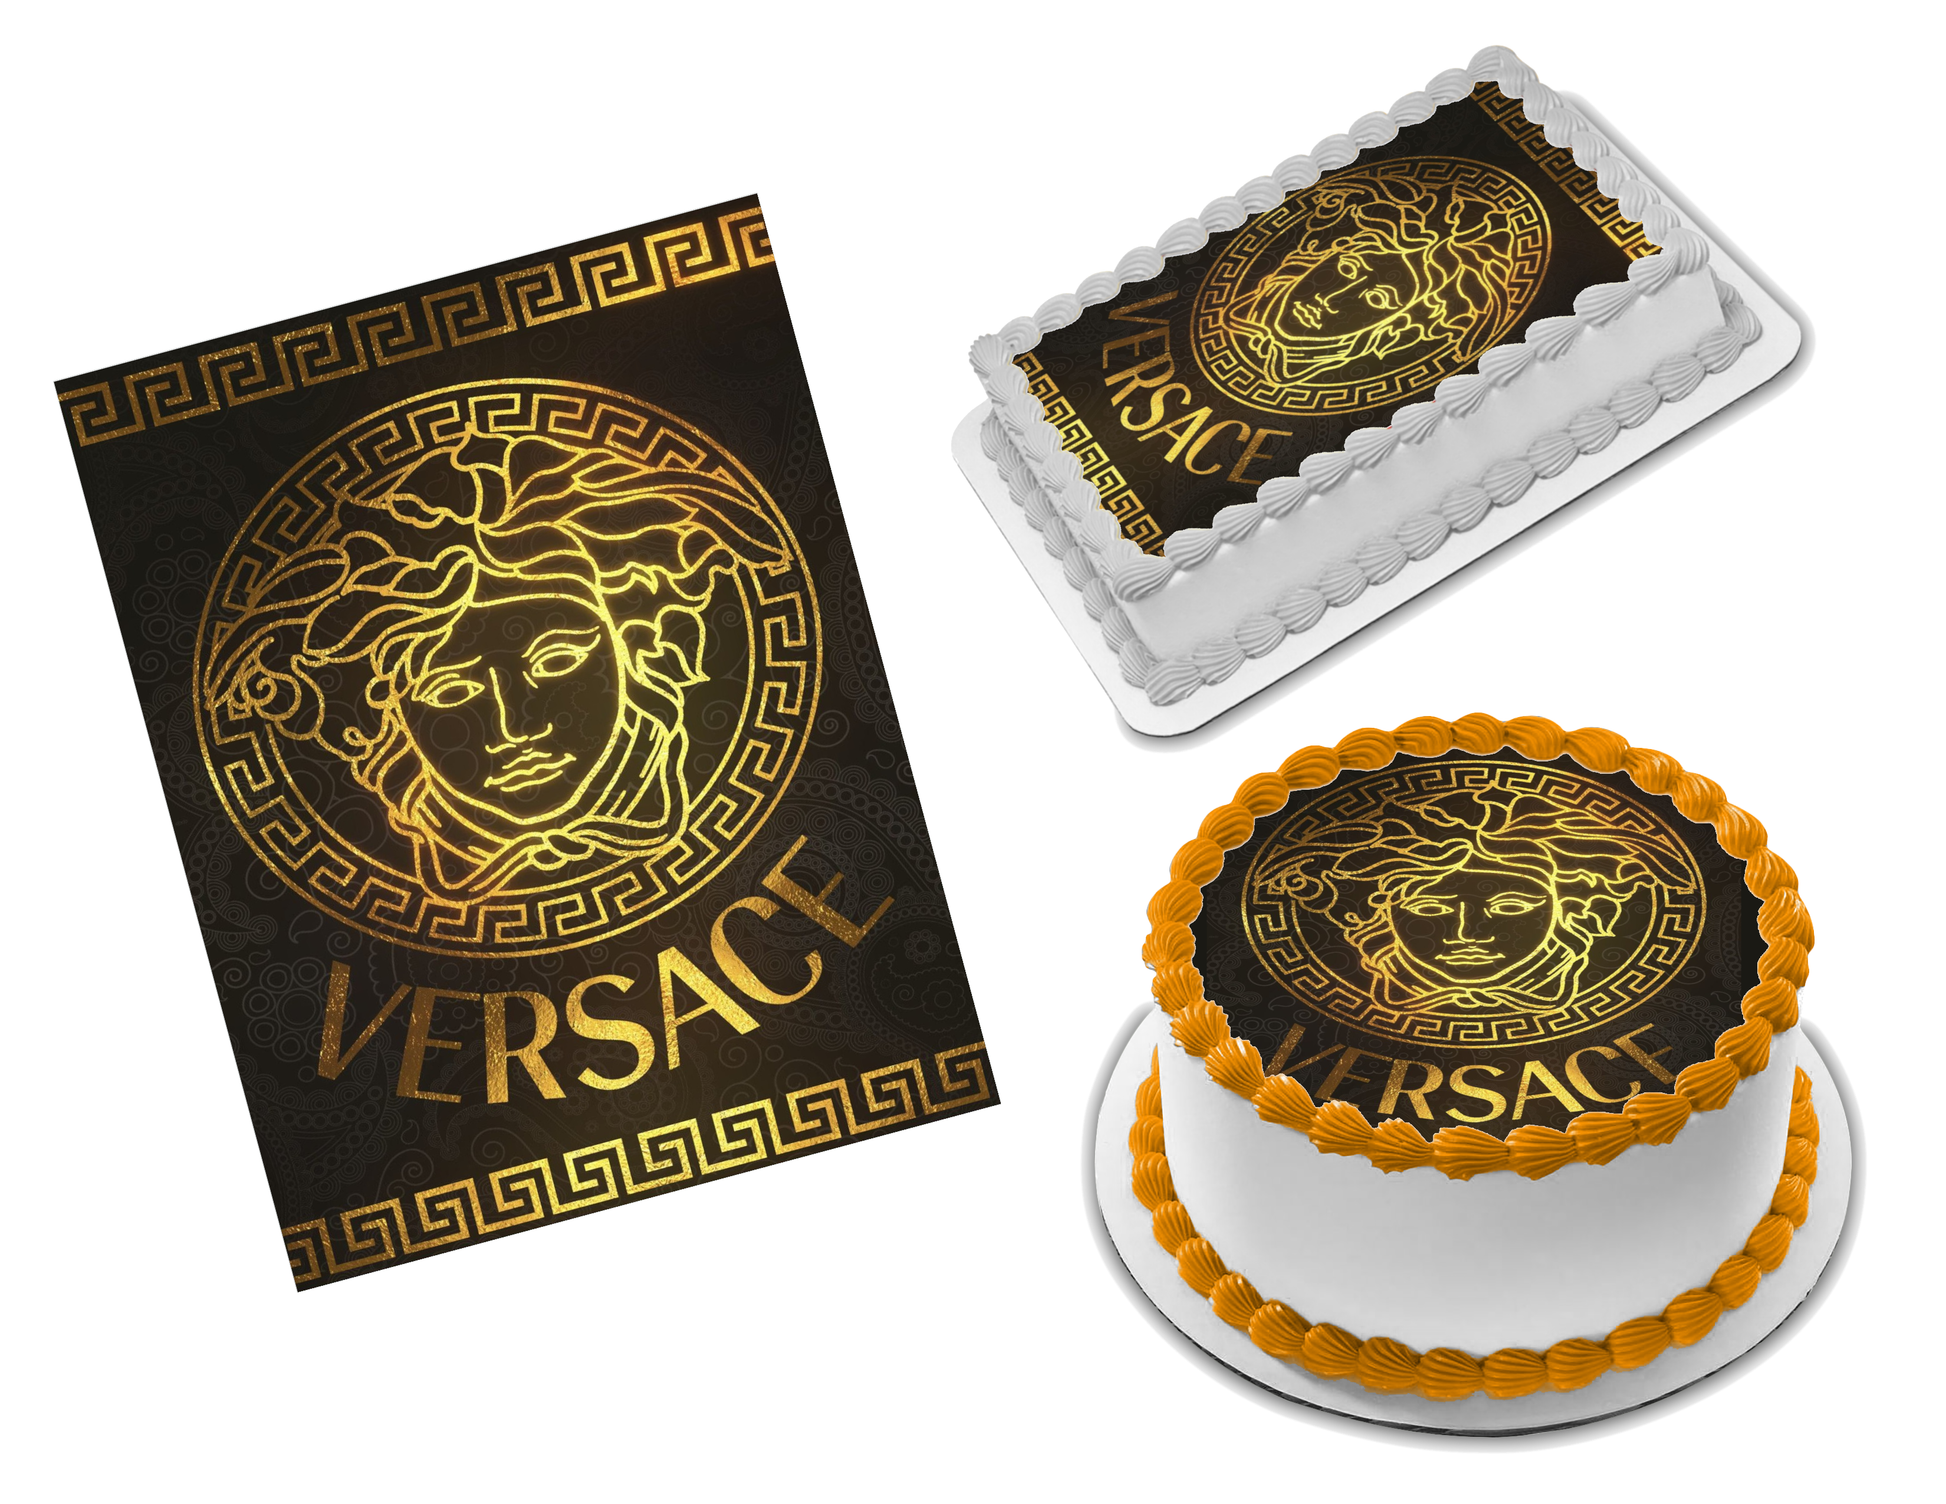 Versace Edible Image Frosting Sheet #6 (70+ sizes)